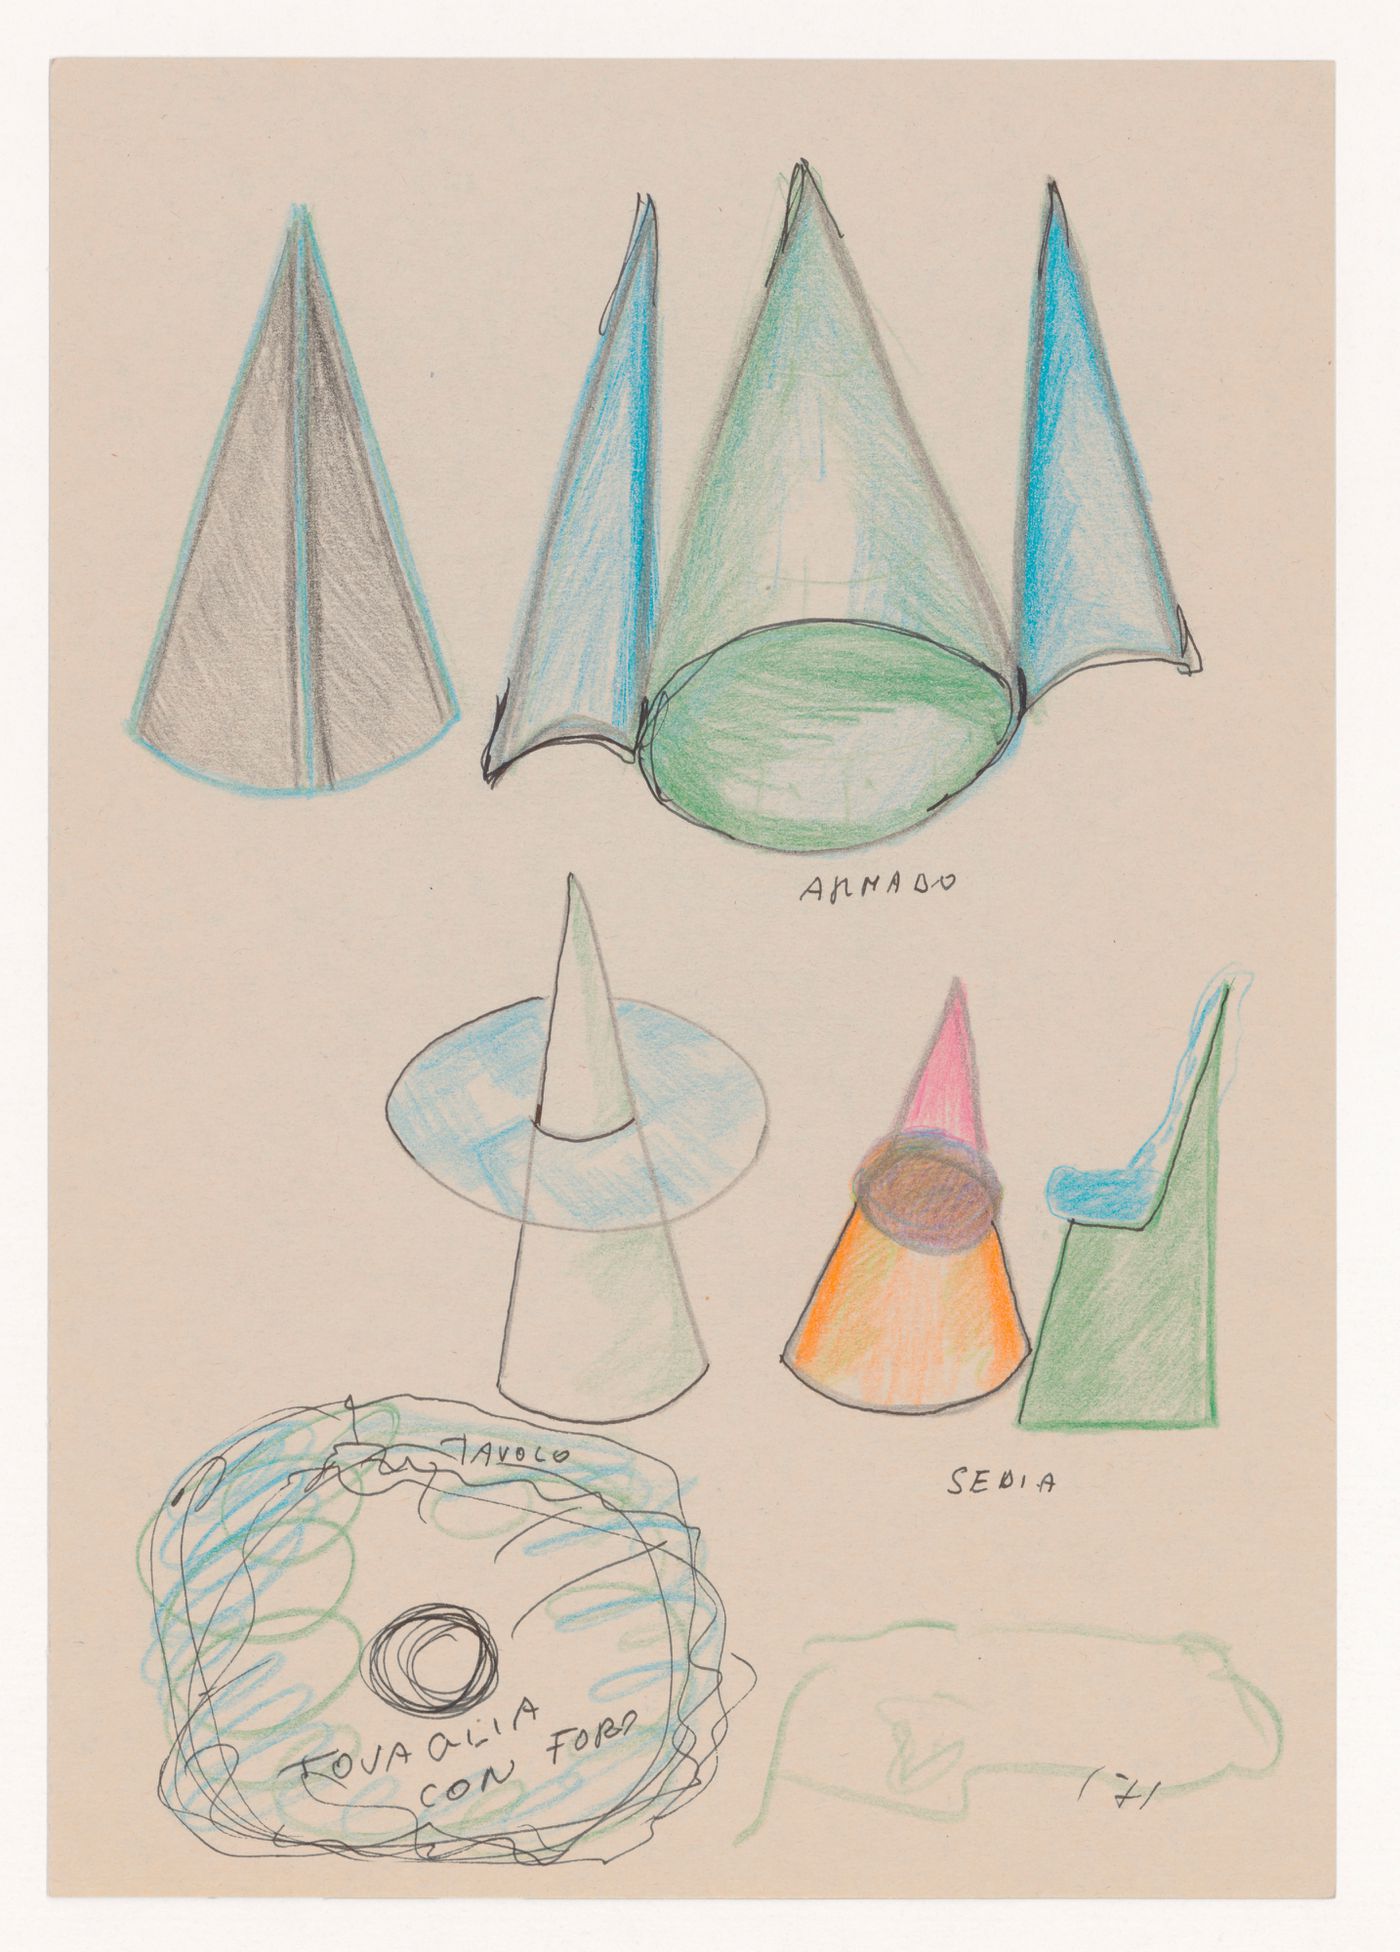 Sketches for Cone table project